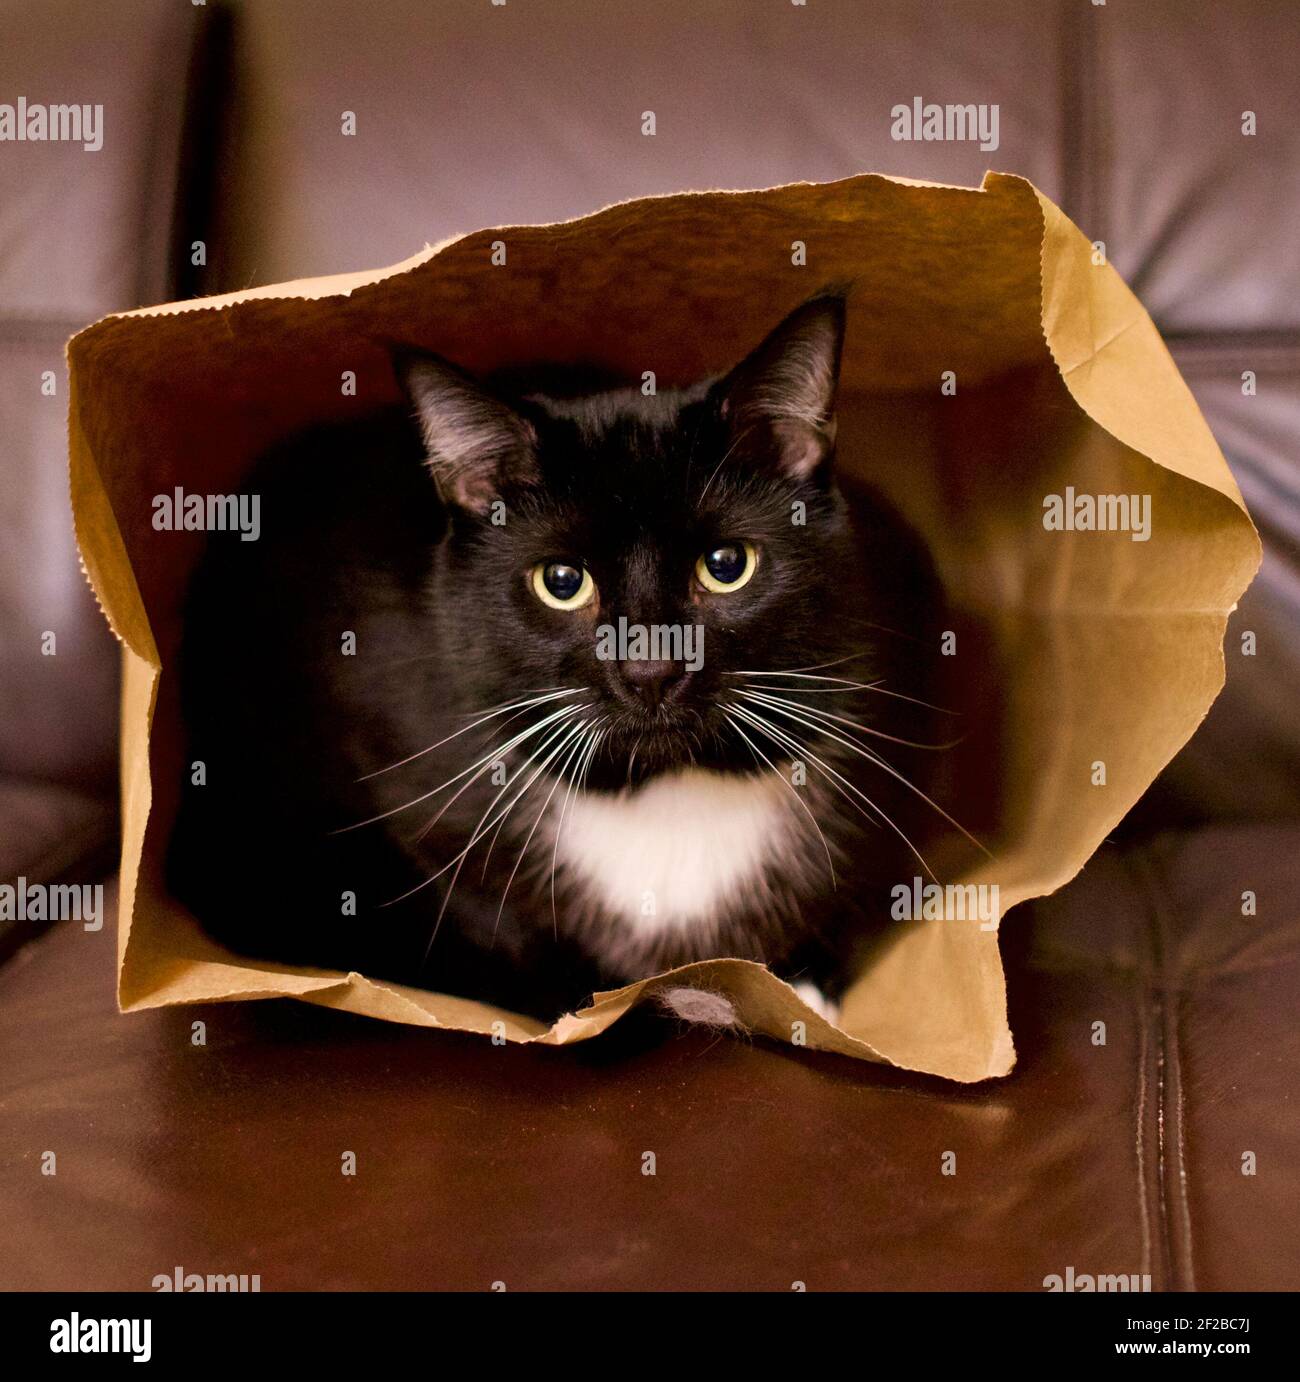 Cat in a brown paper bag, black cat with gold eyes and white markings stares out of its hiding place. Stock Photo